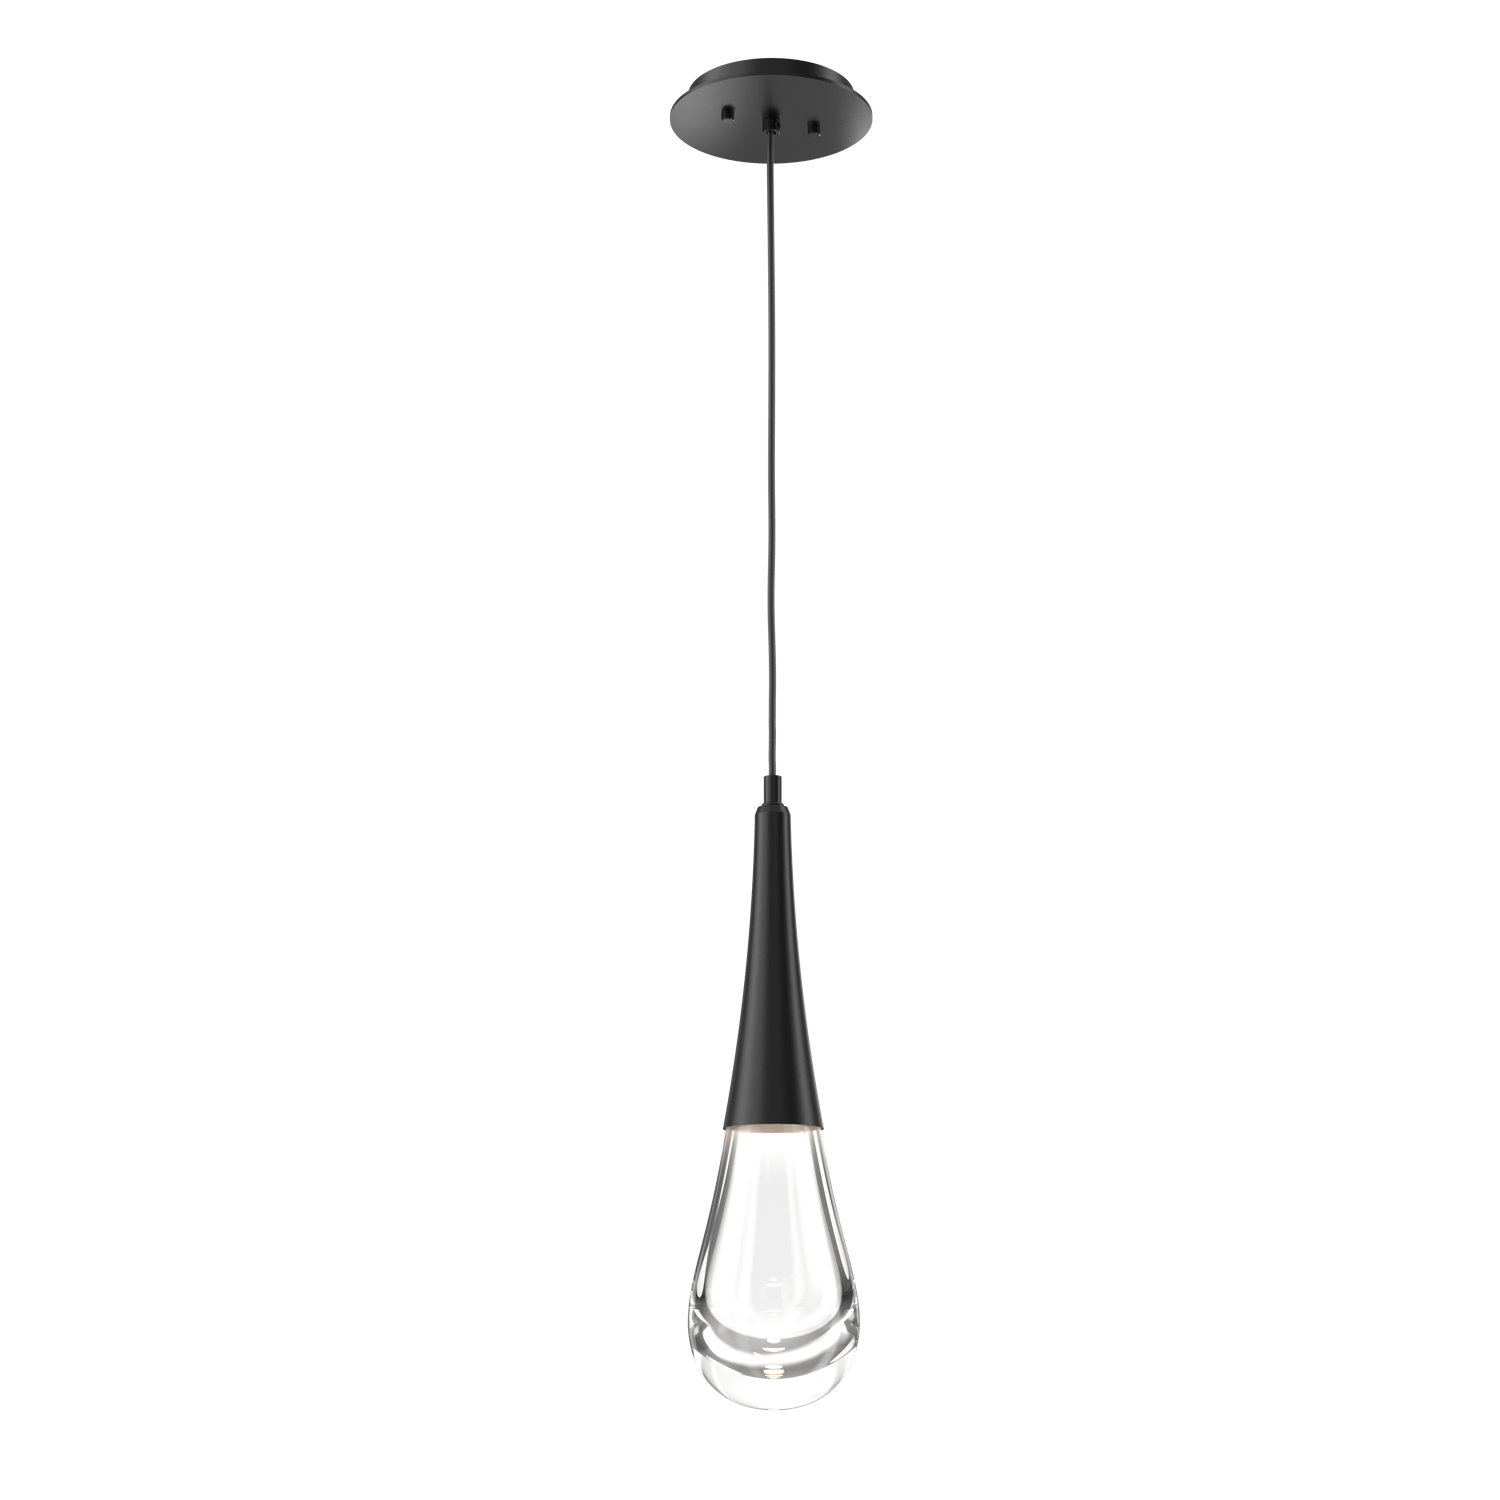 LAB0078-01-MB-Hammerton-Studio-Raindrop-pendant-light-with-matte-black-finish-and-clear-blown-glass-shades-and-LED-lamping